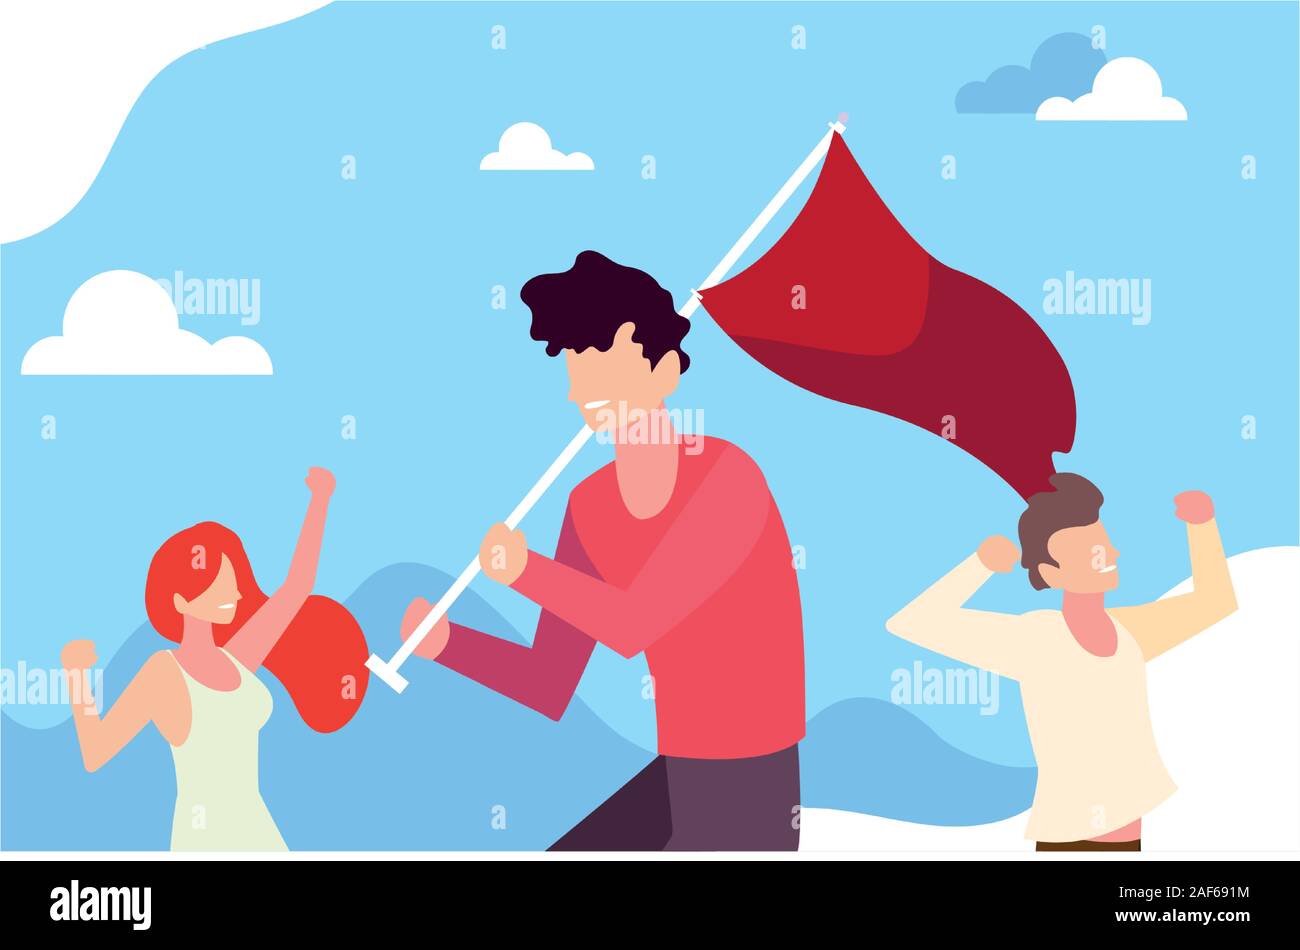 group of people holding a red flag vector illustration design Stock Vector